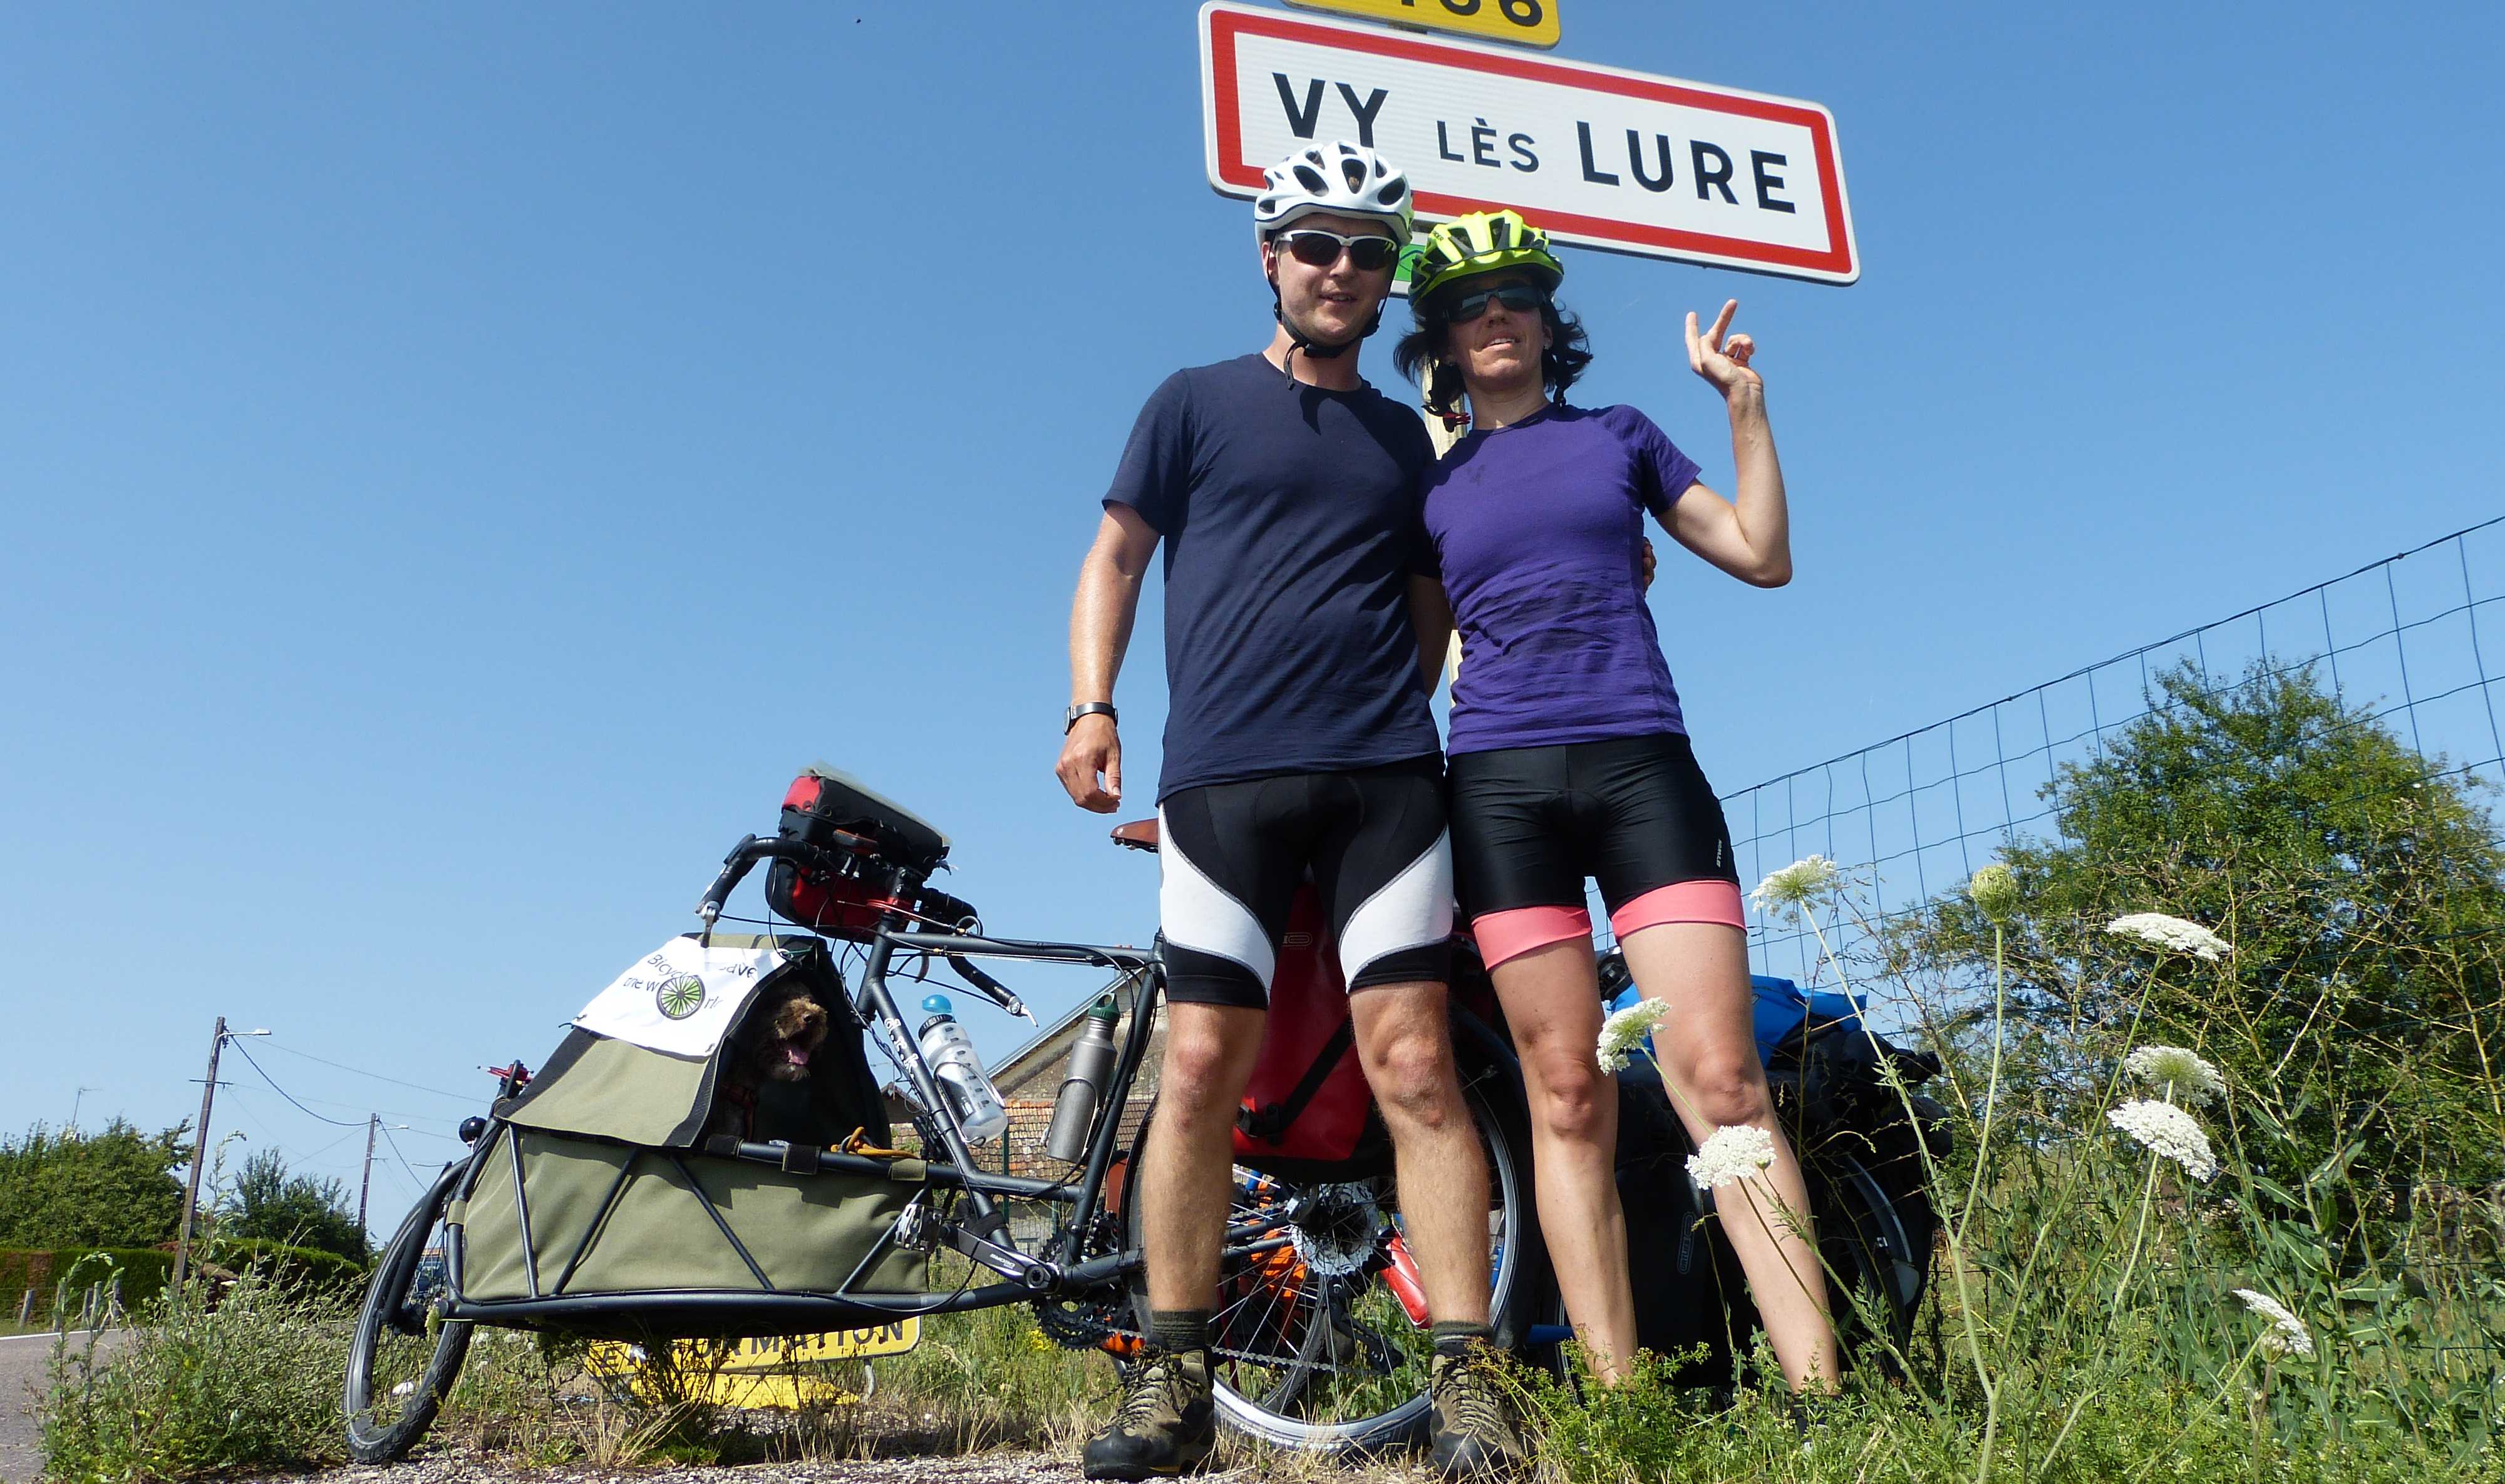 Vy-lès-Lure! The start of our bicycle-shaped route